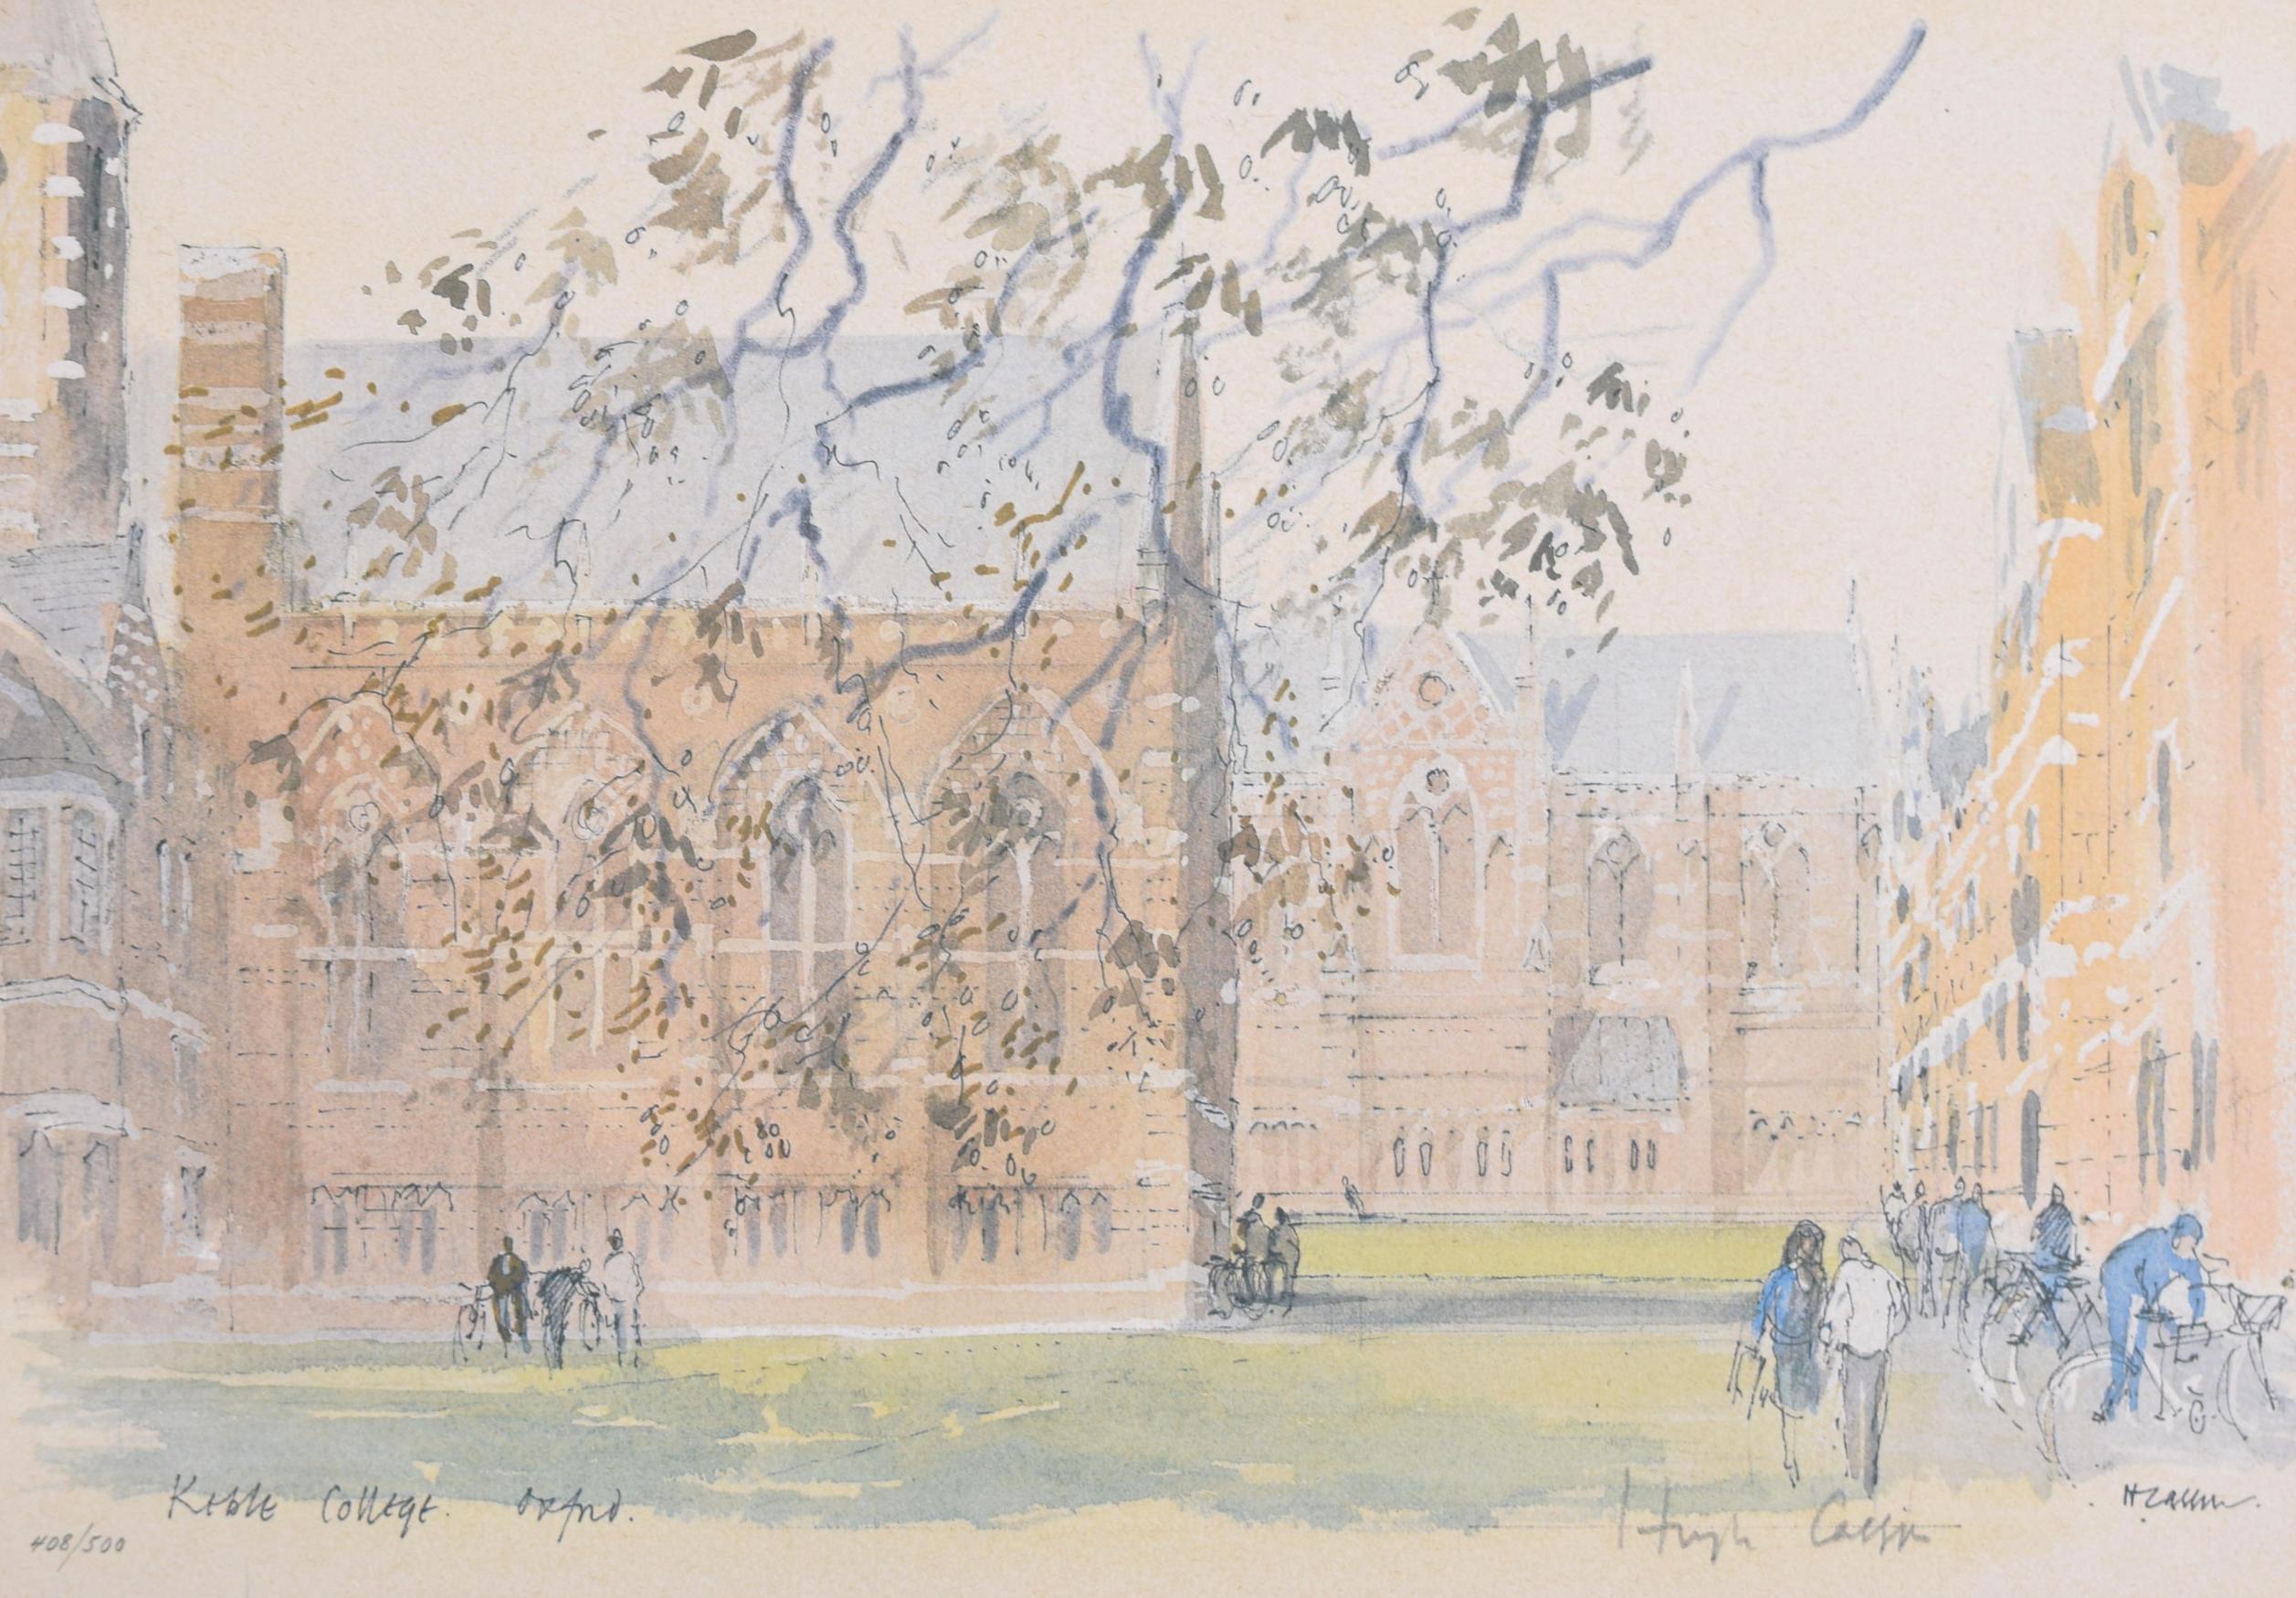 Keble College, Oxford lithograph by Hugh Casson